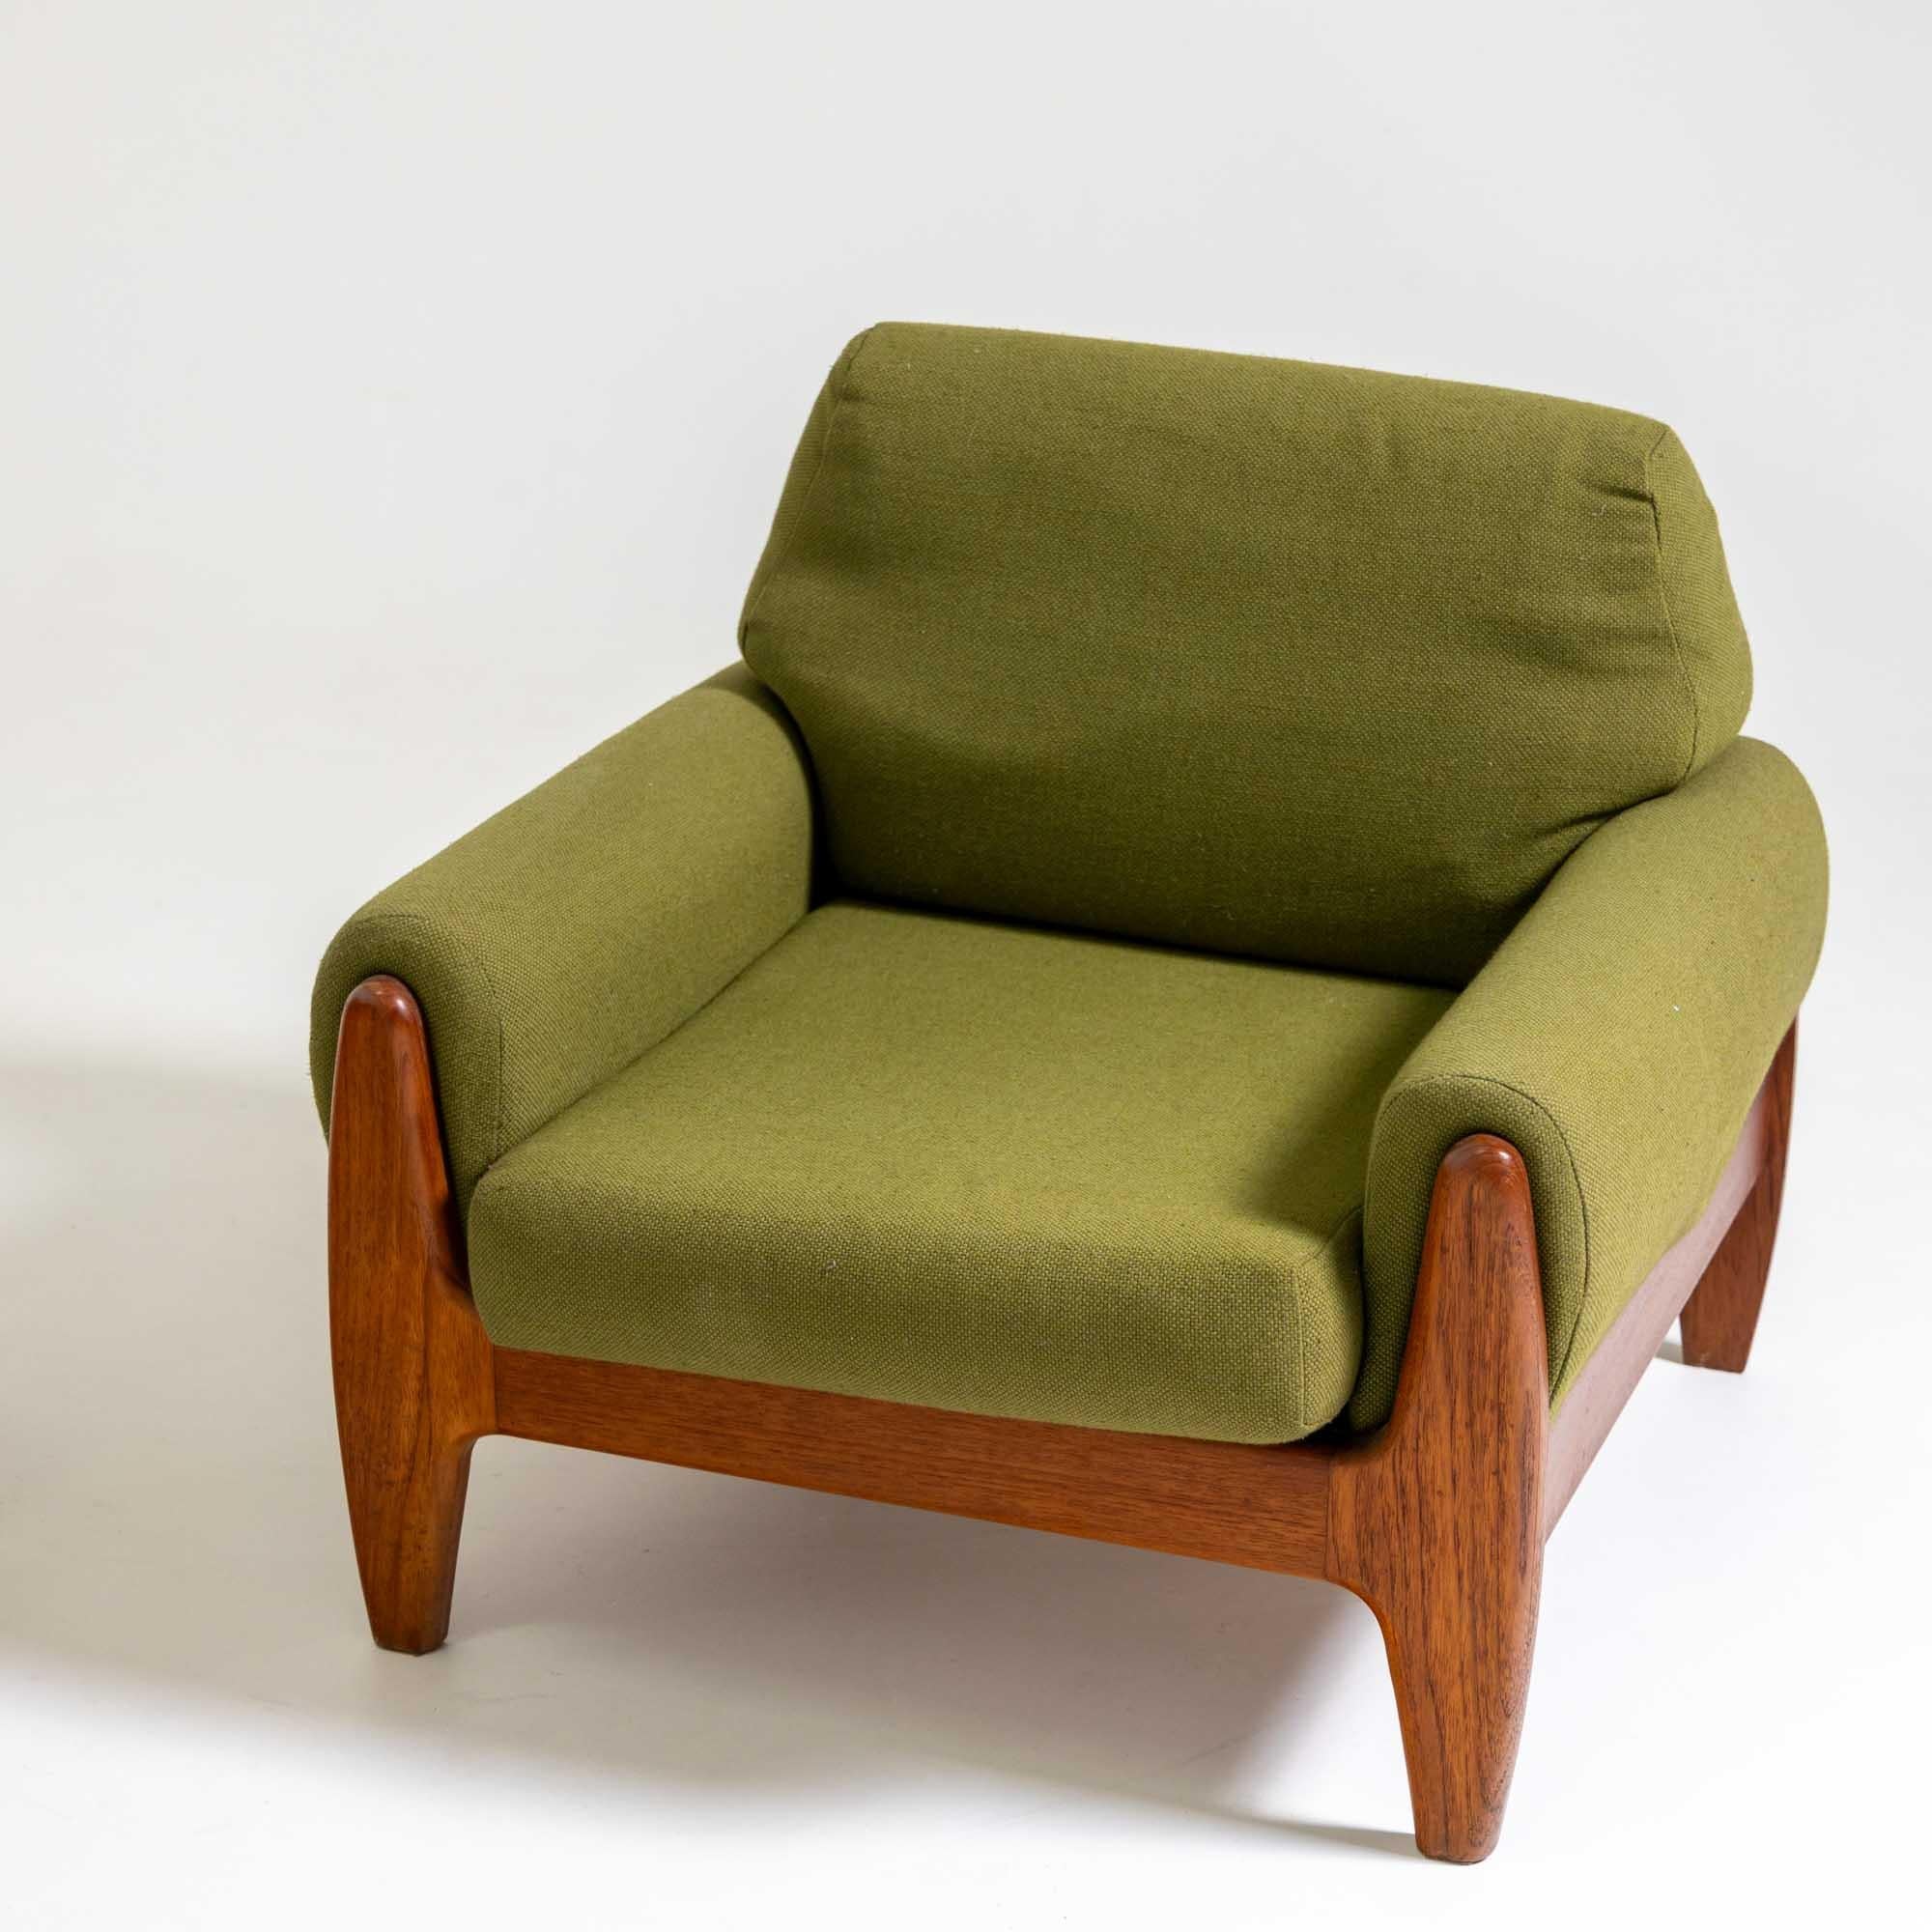 Pair of Armchairs with Green Upholstery, by Illum Denmark, Mid-20th Century In Good Condition For Sale In Greding, DE